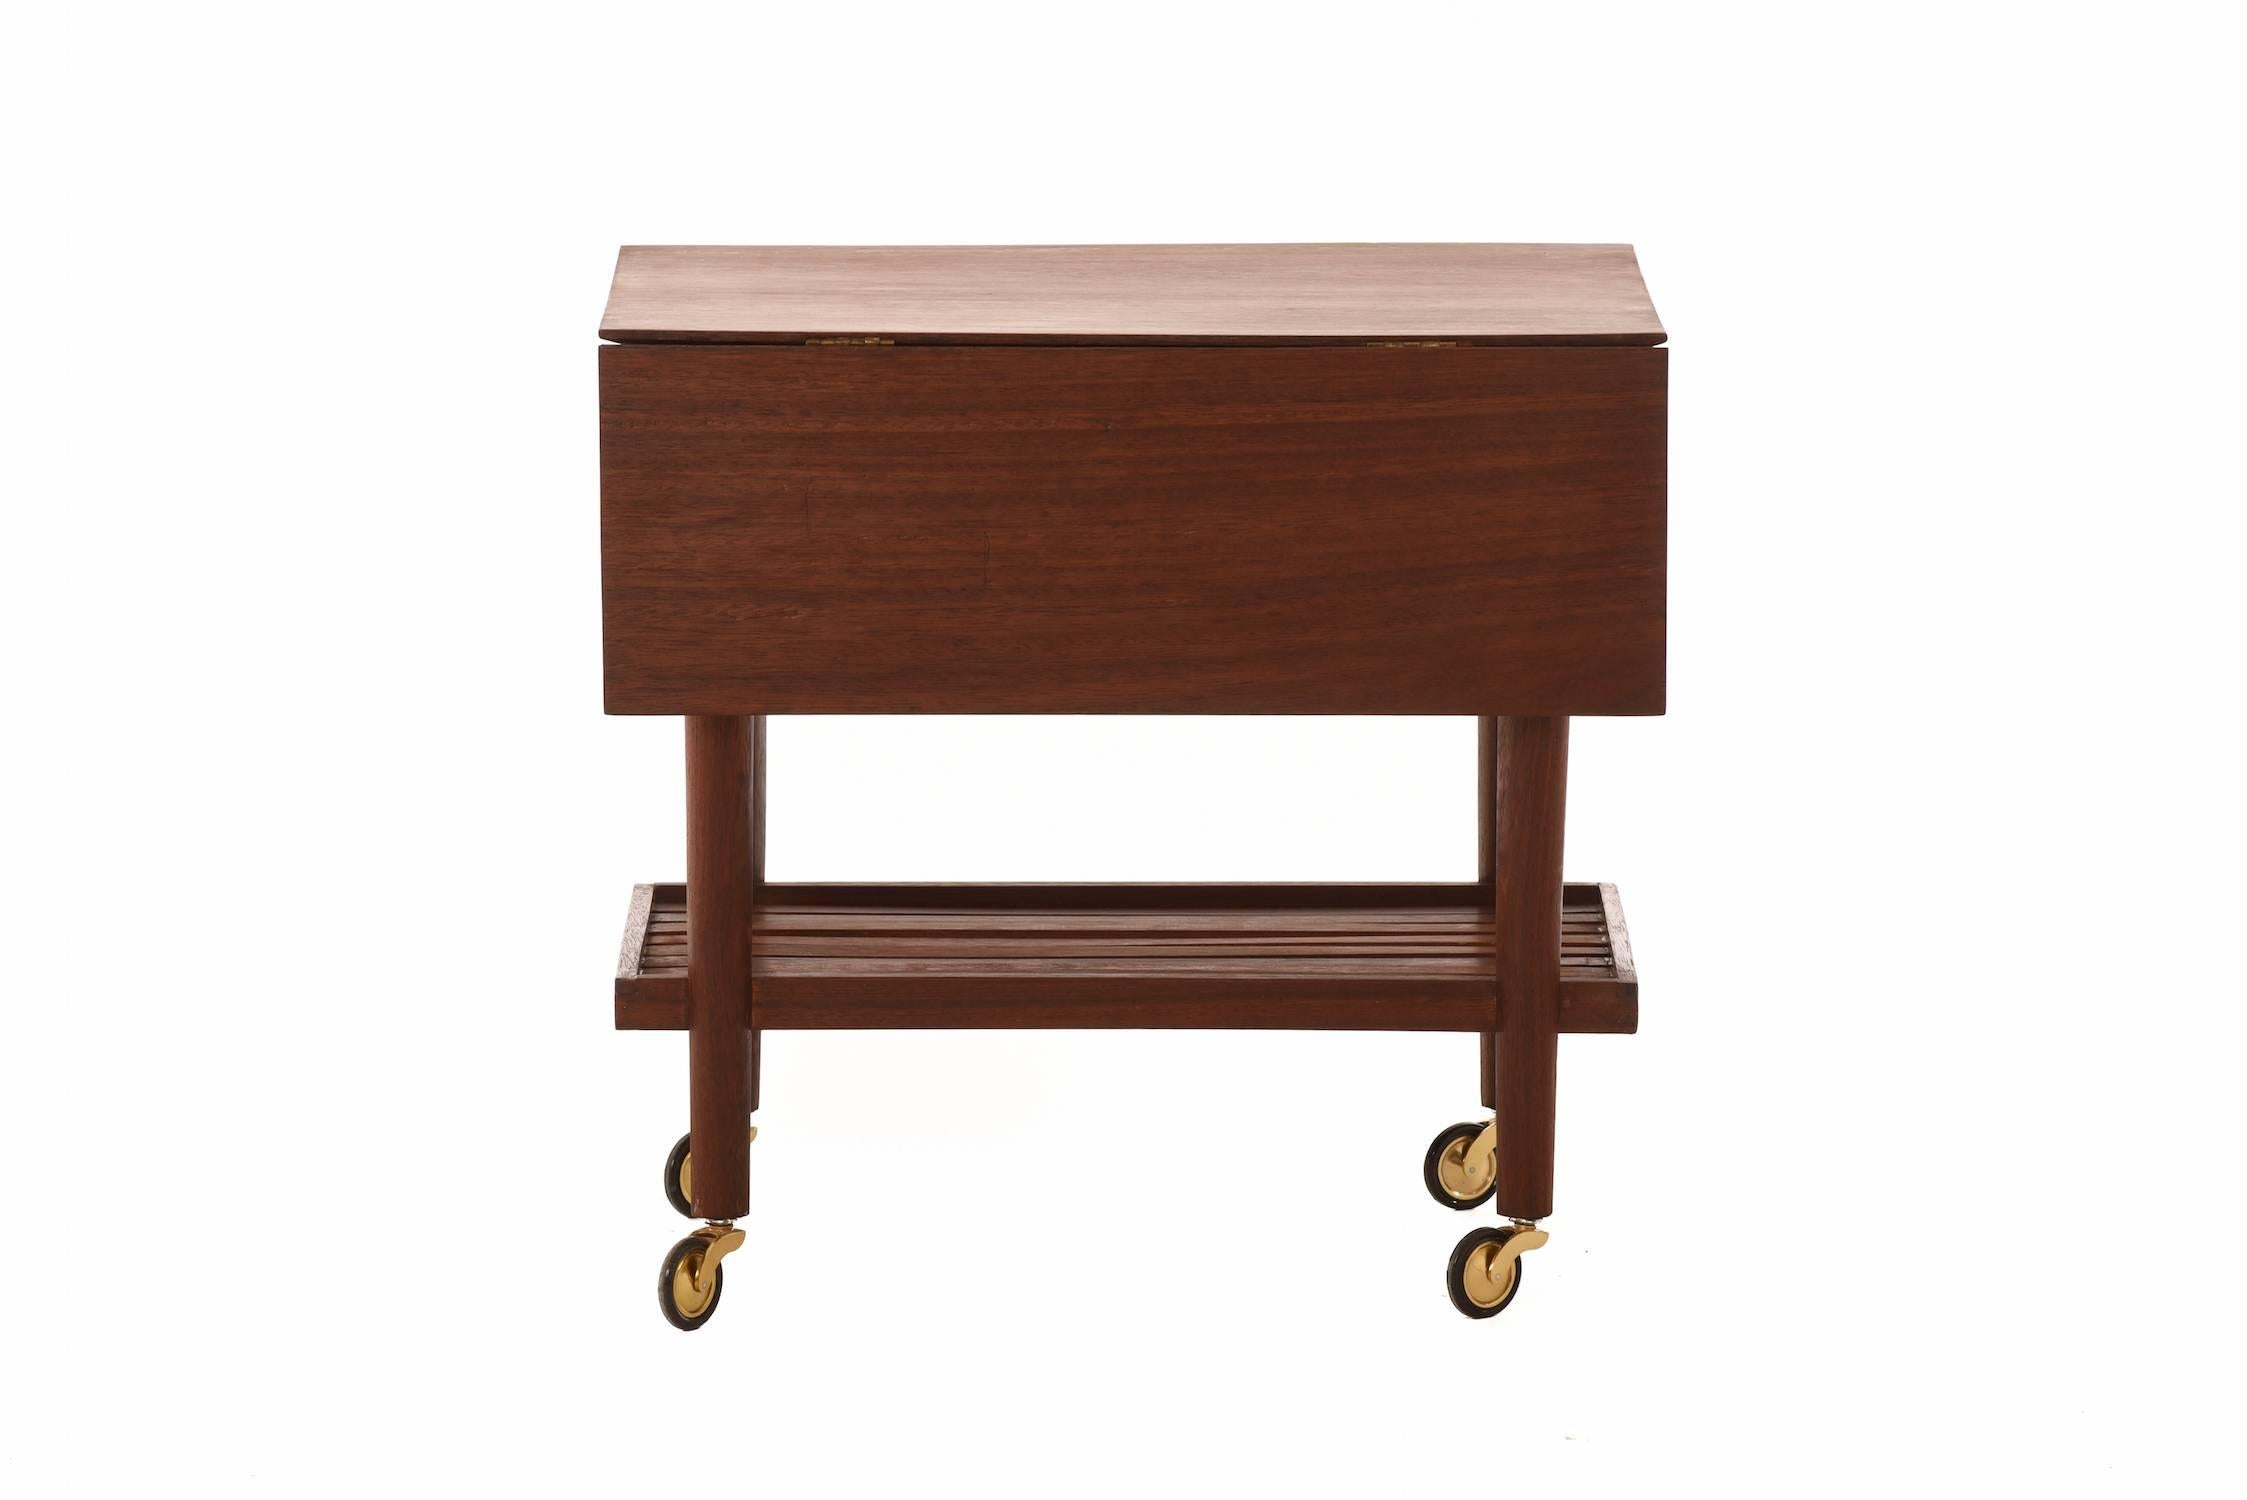 Transitional Modern serving cart extends to 34.25" with drop leaves open. Solid wood top with internal bevel. Gorgeously grained African teak.

Professional, skilled furniture restoration is an integral part of what we do every day. Our goal